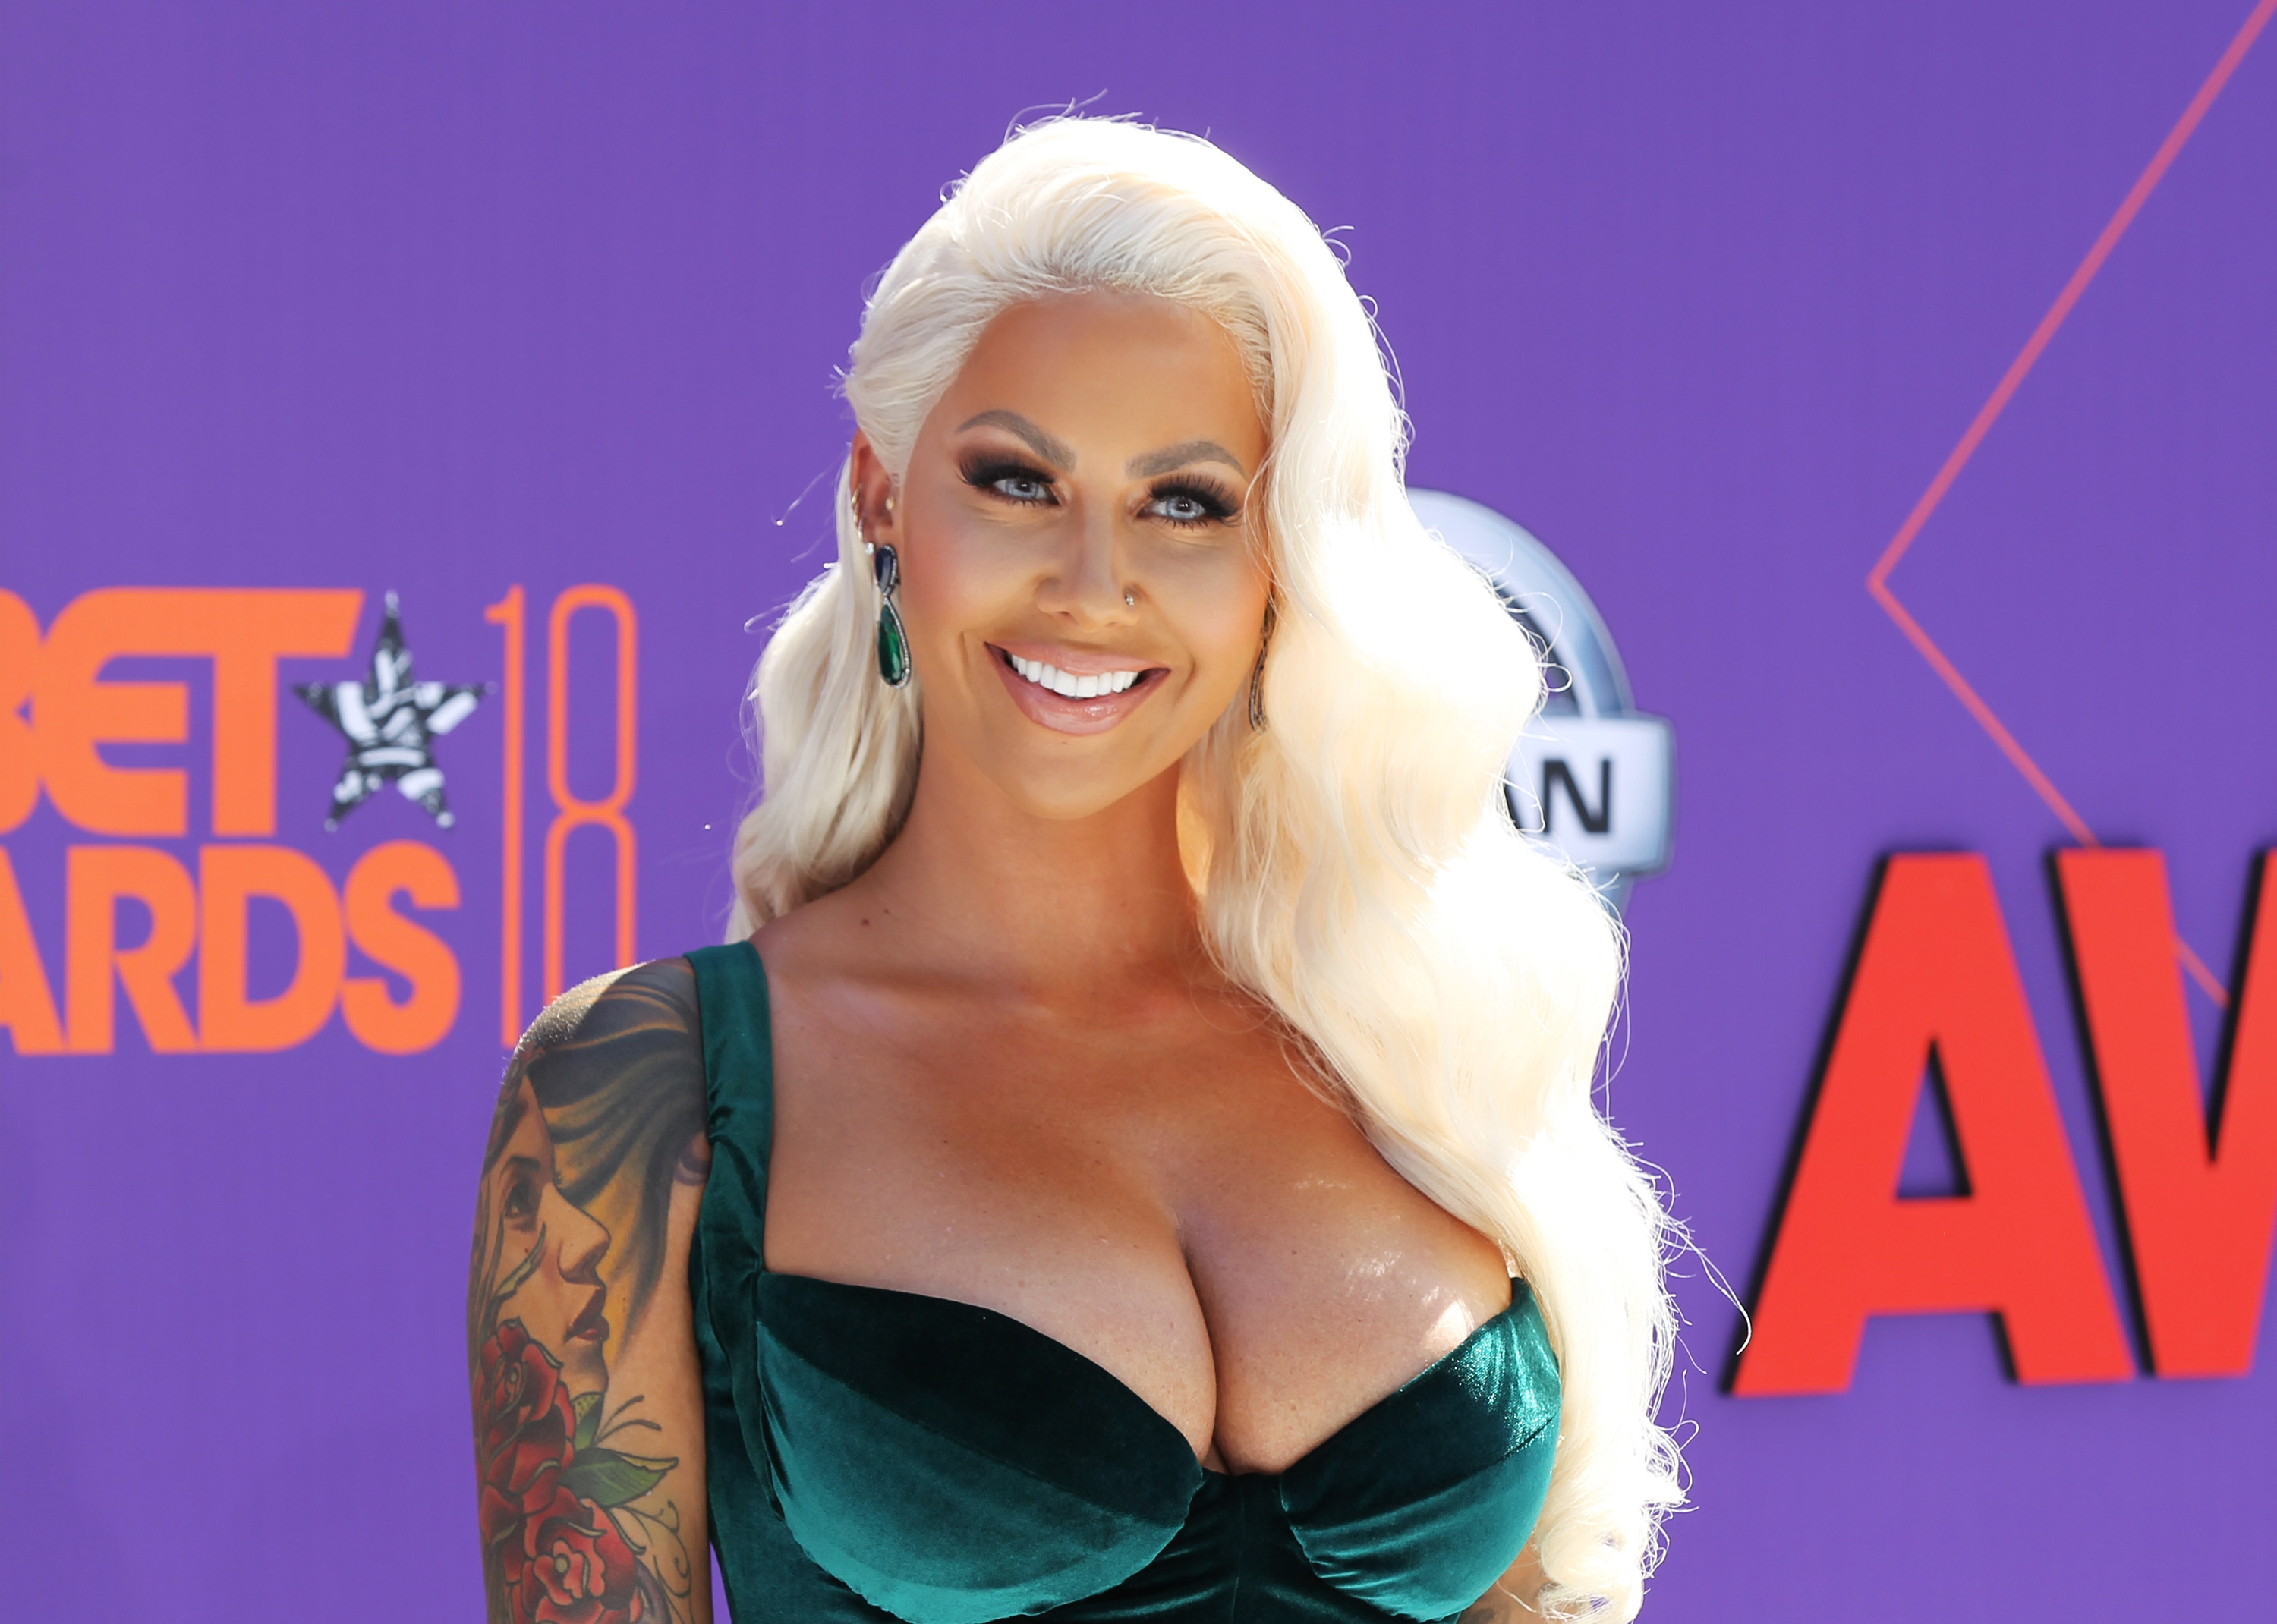 Amber Rose & Boyfriend Monte Morris Have A Lot Of "Fun" Together